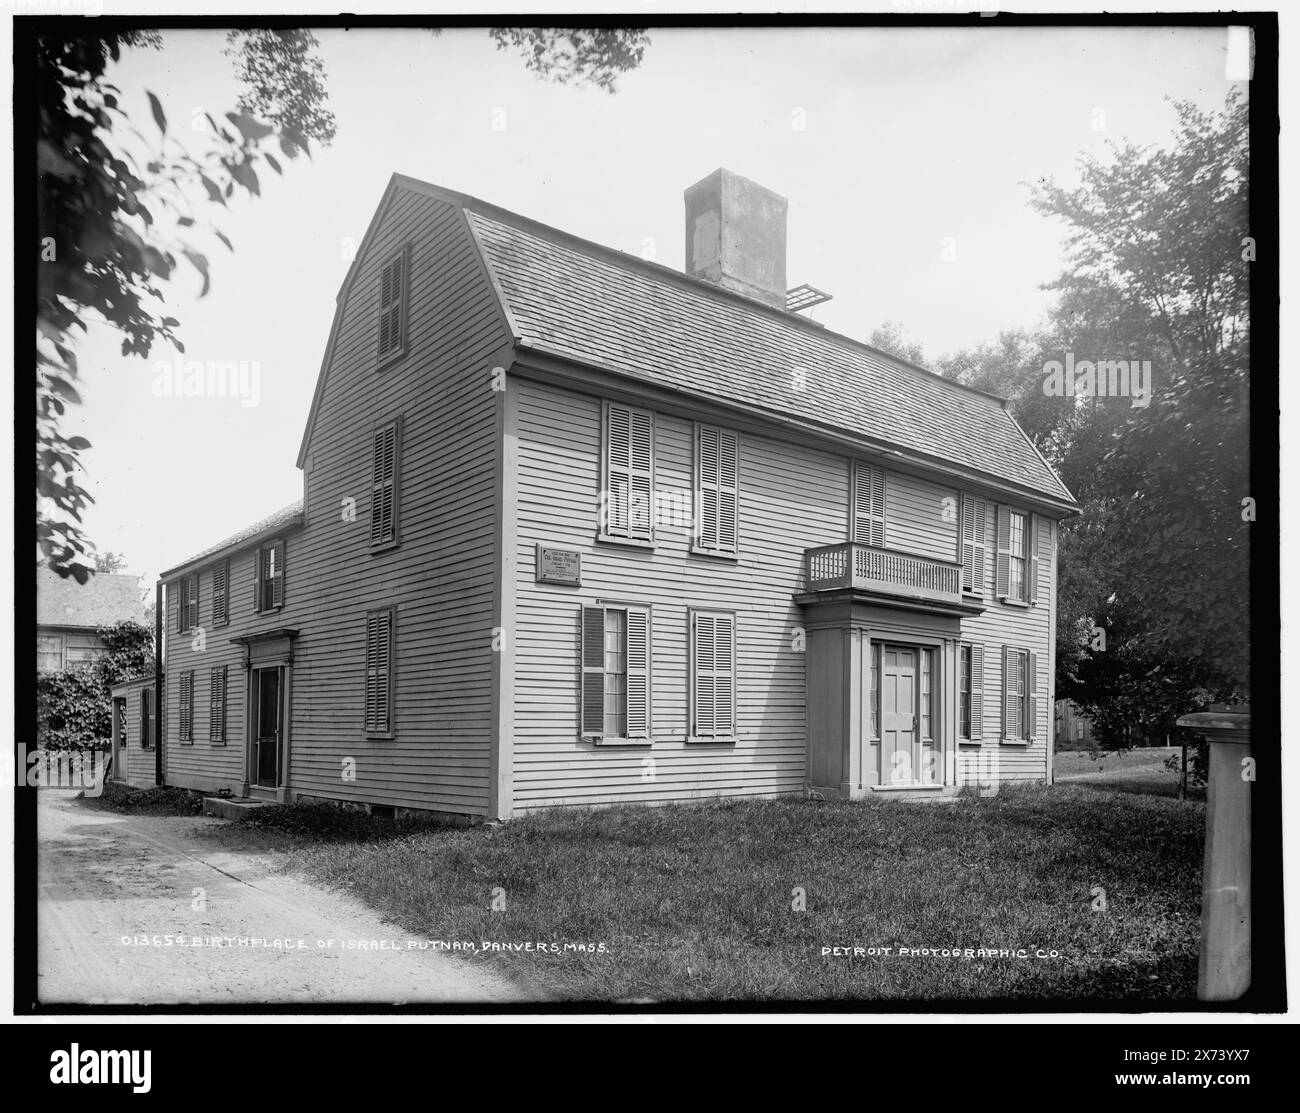 Birthplace of Israel Putnam, Danvers, Mass., Date based on Detroit, Catalogue J Supplement (1901-1906)., '456' on negative., Detroit Publishing Co. no. 013654., Gift; State Historical Society of Colorado; 1949,  Putnam, Israel,, 1718-1790, Birthplace. , Birthplaces. , United States, Massachusetts, Danvers. Stock Photo